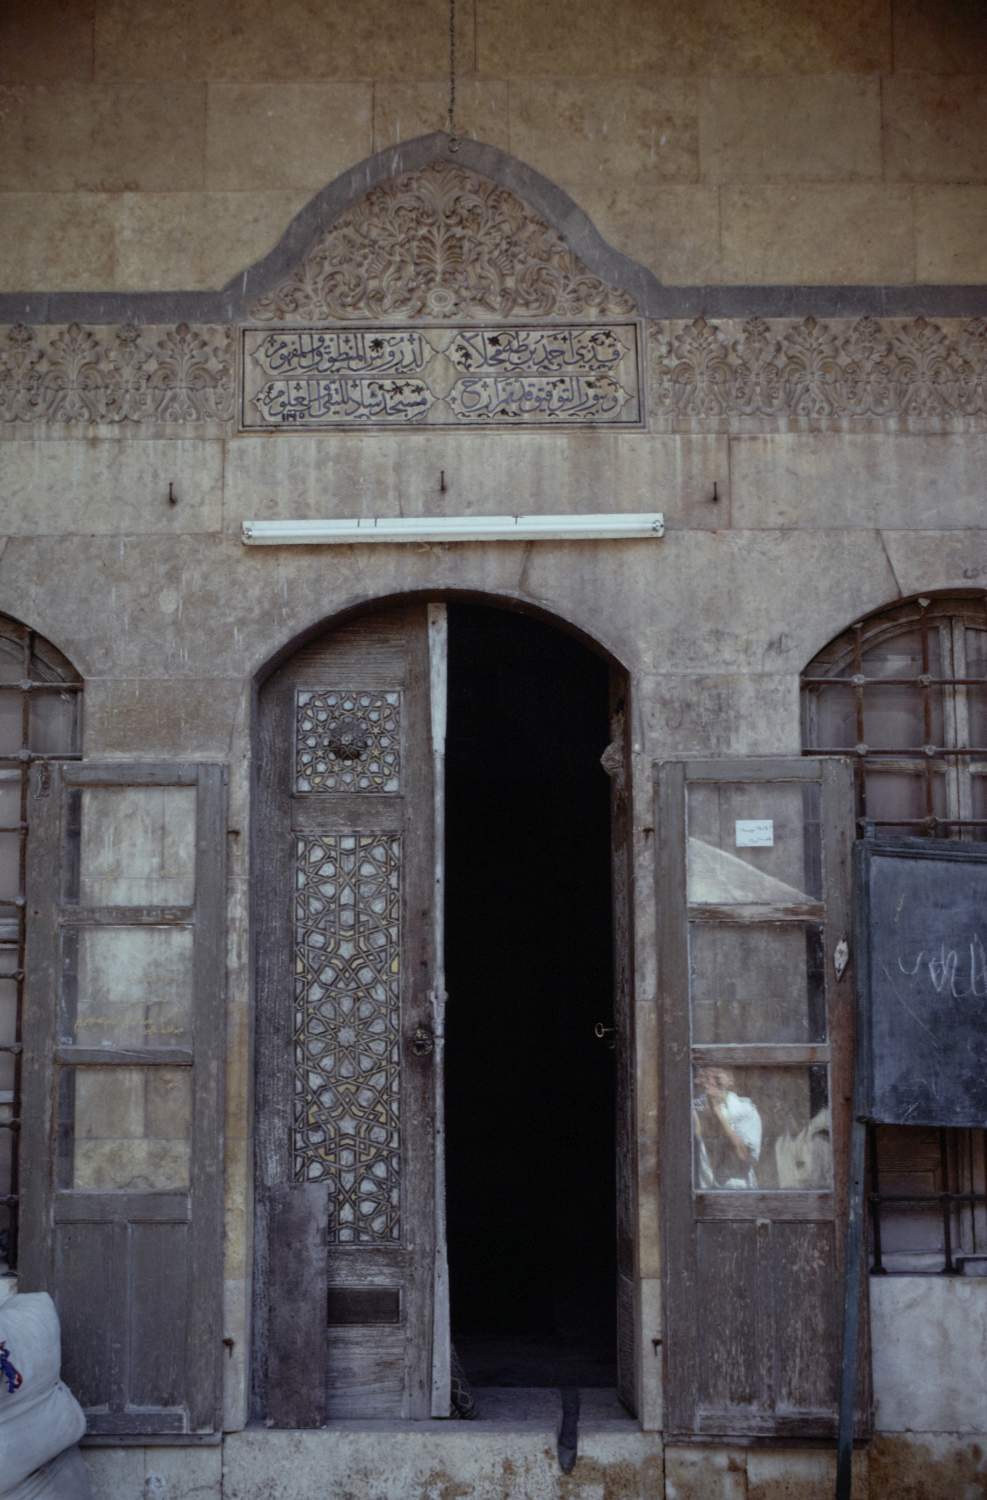 View of mosque entrance.